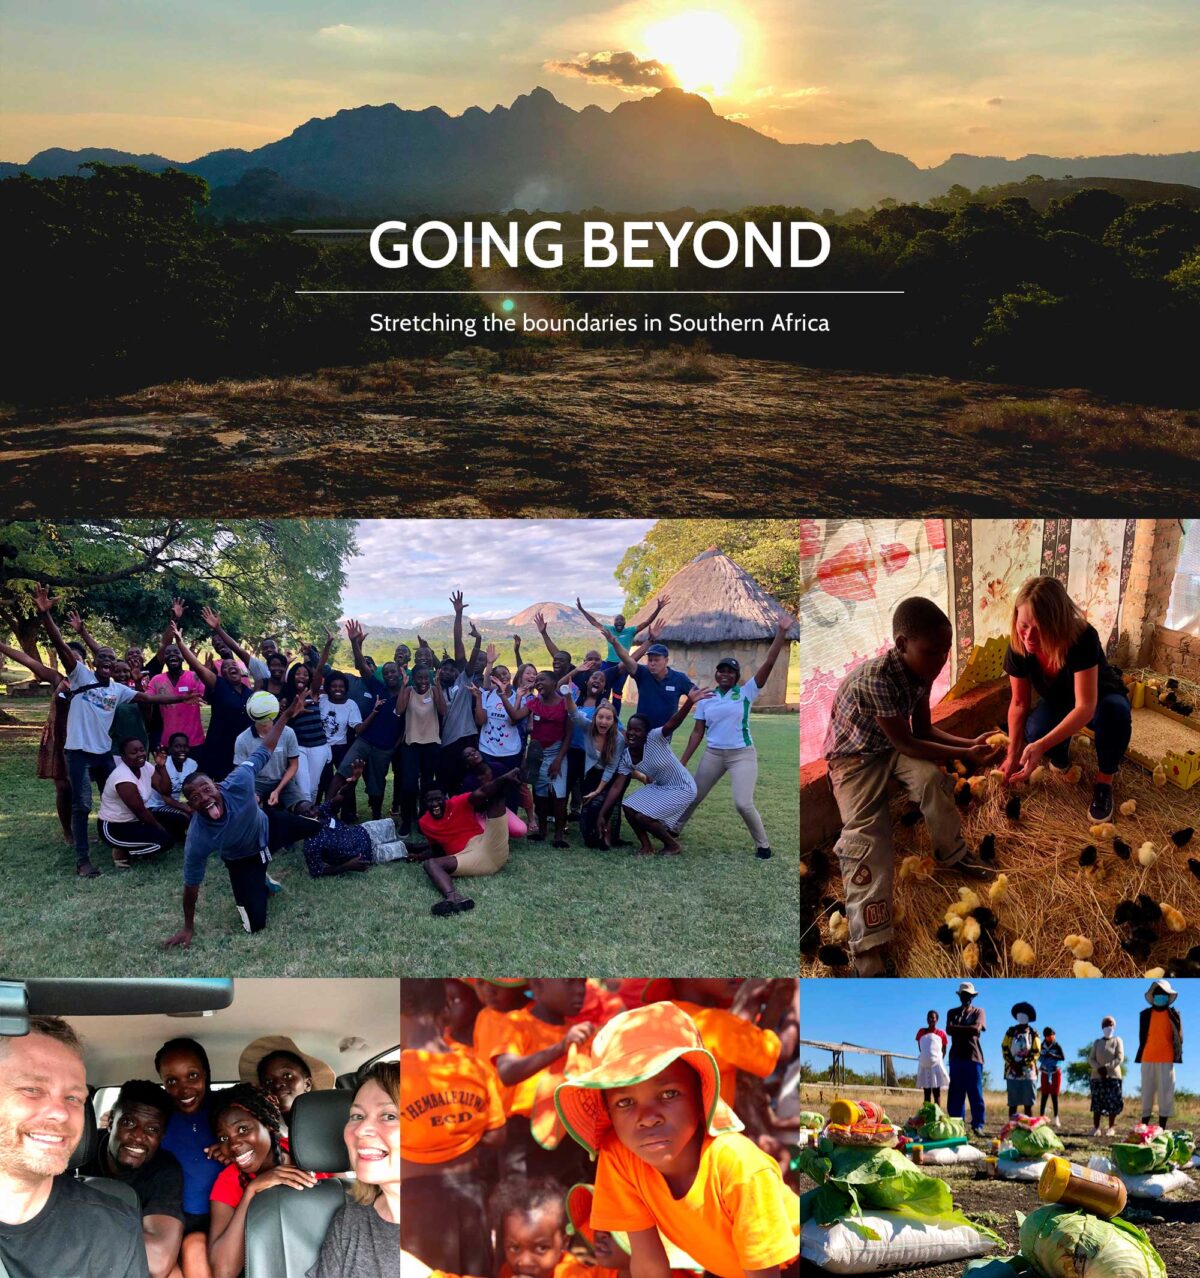 Going Beyond - Stretching the boundaries in Southern Africa